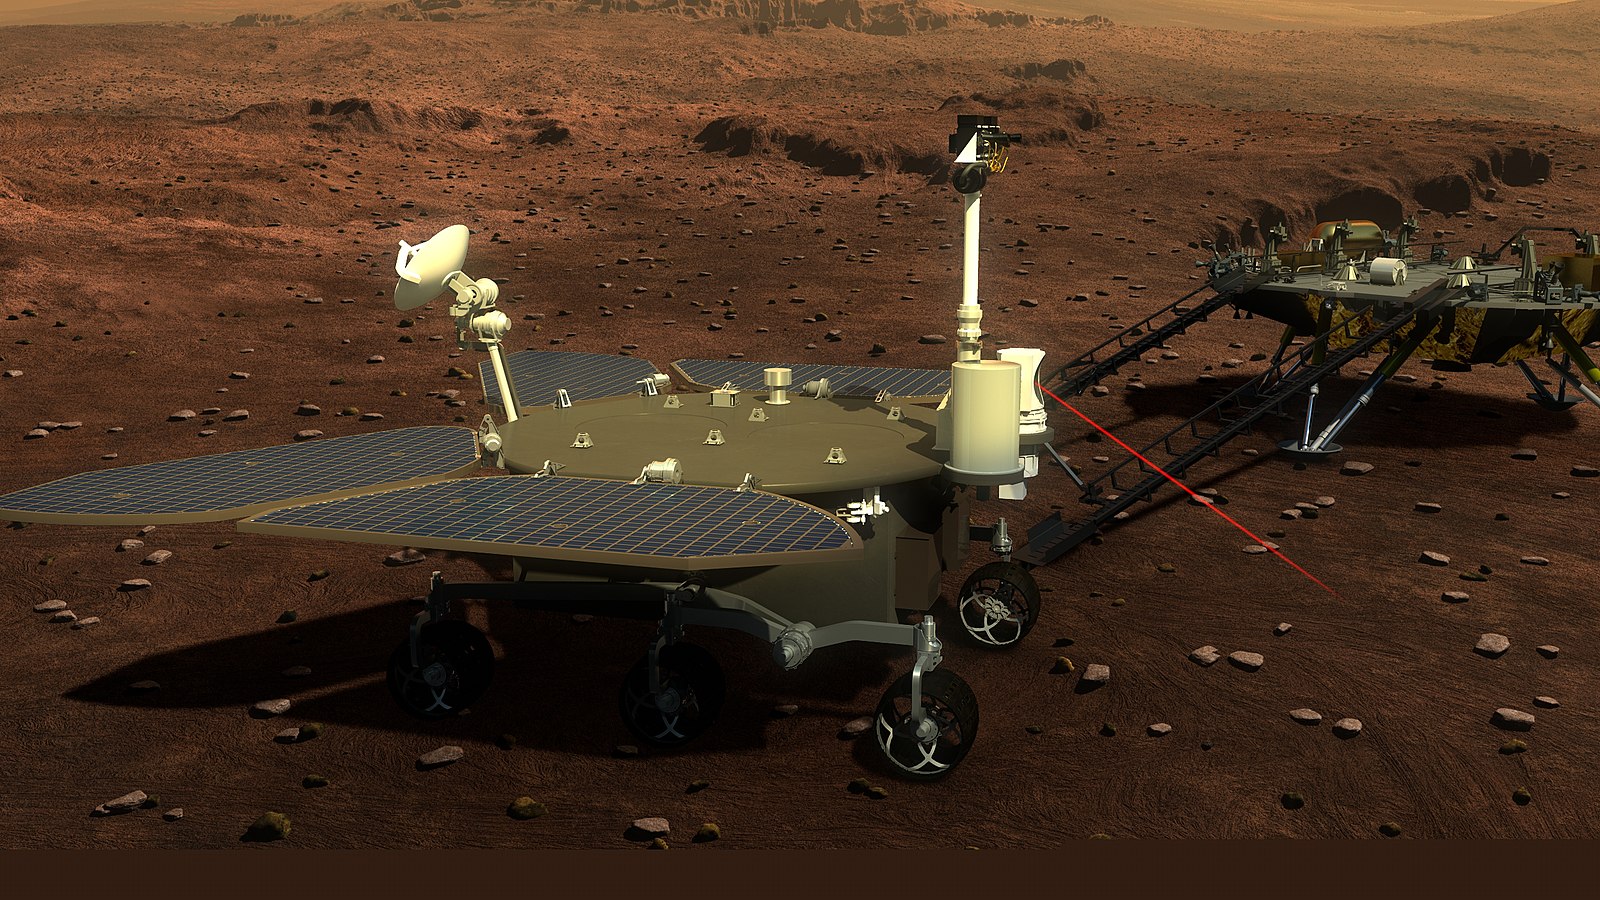 Illustration by an artist depicting the Mars rover in the Tianwen-1 mission.  Illustration: China National Space Agency